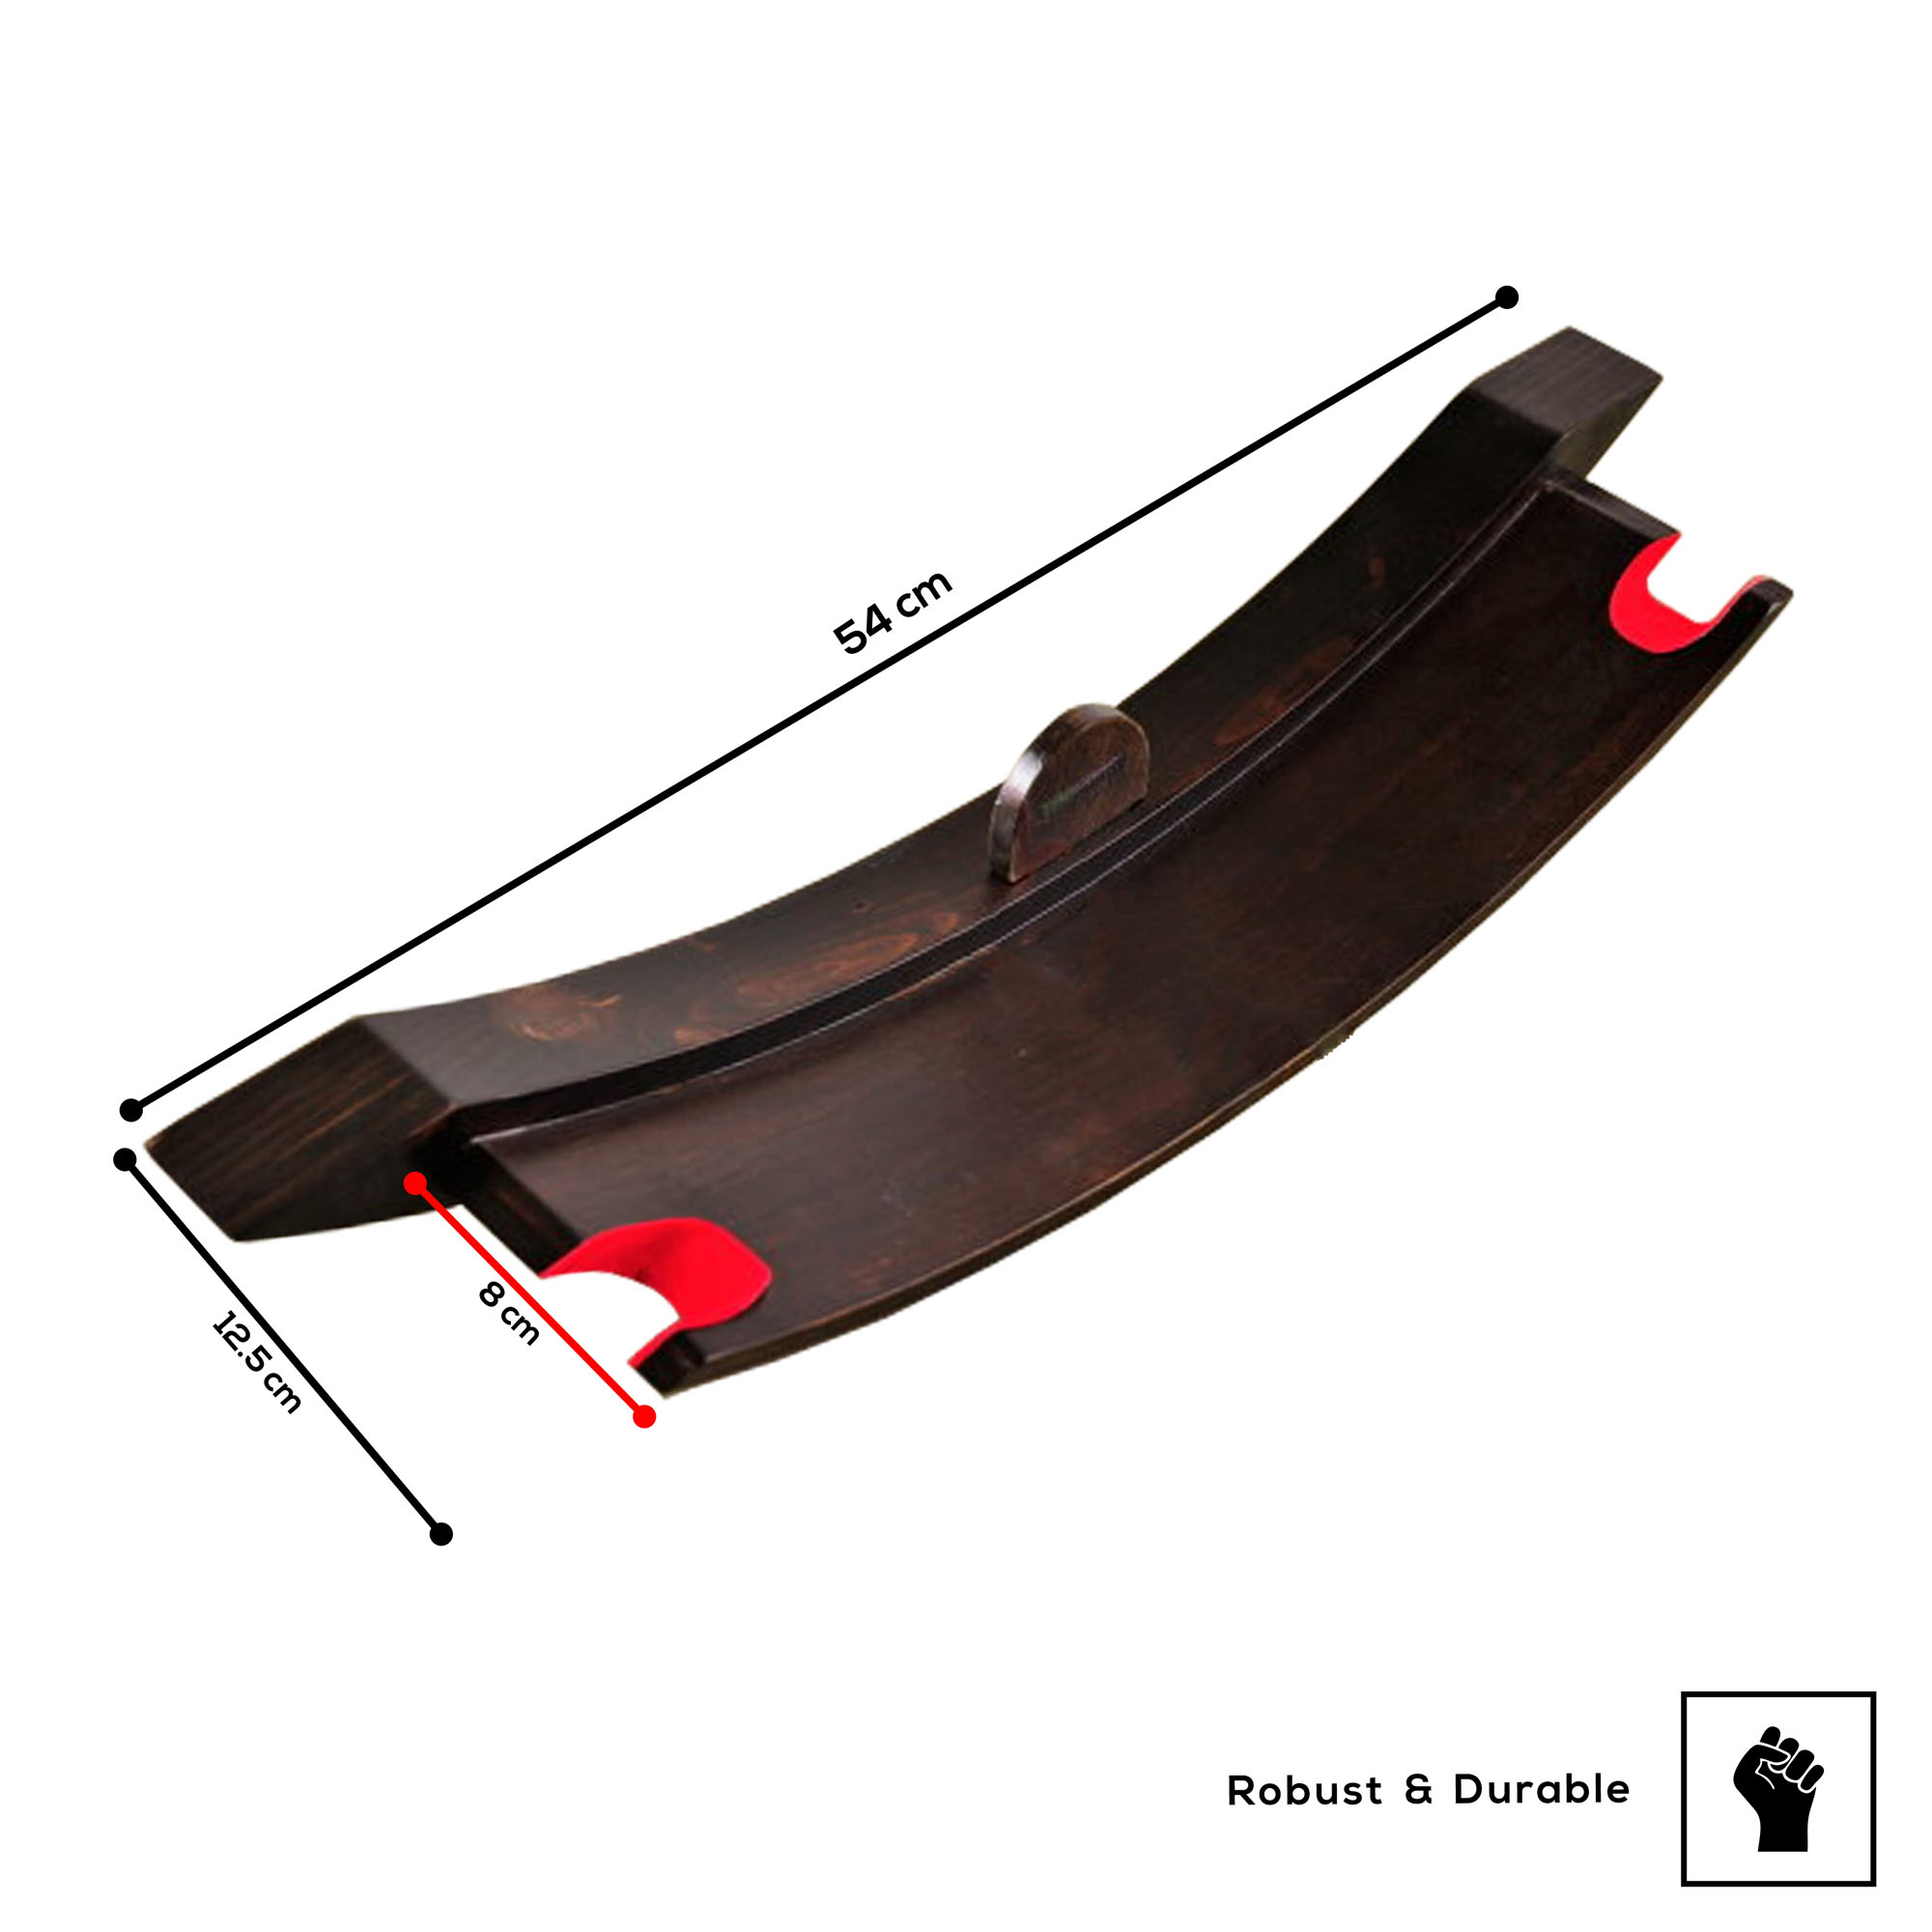 Design wall mount for a sword - brown